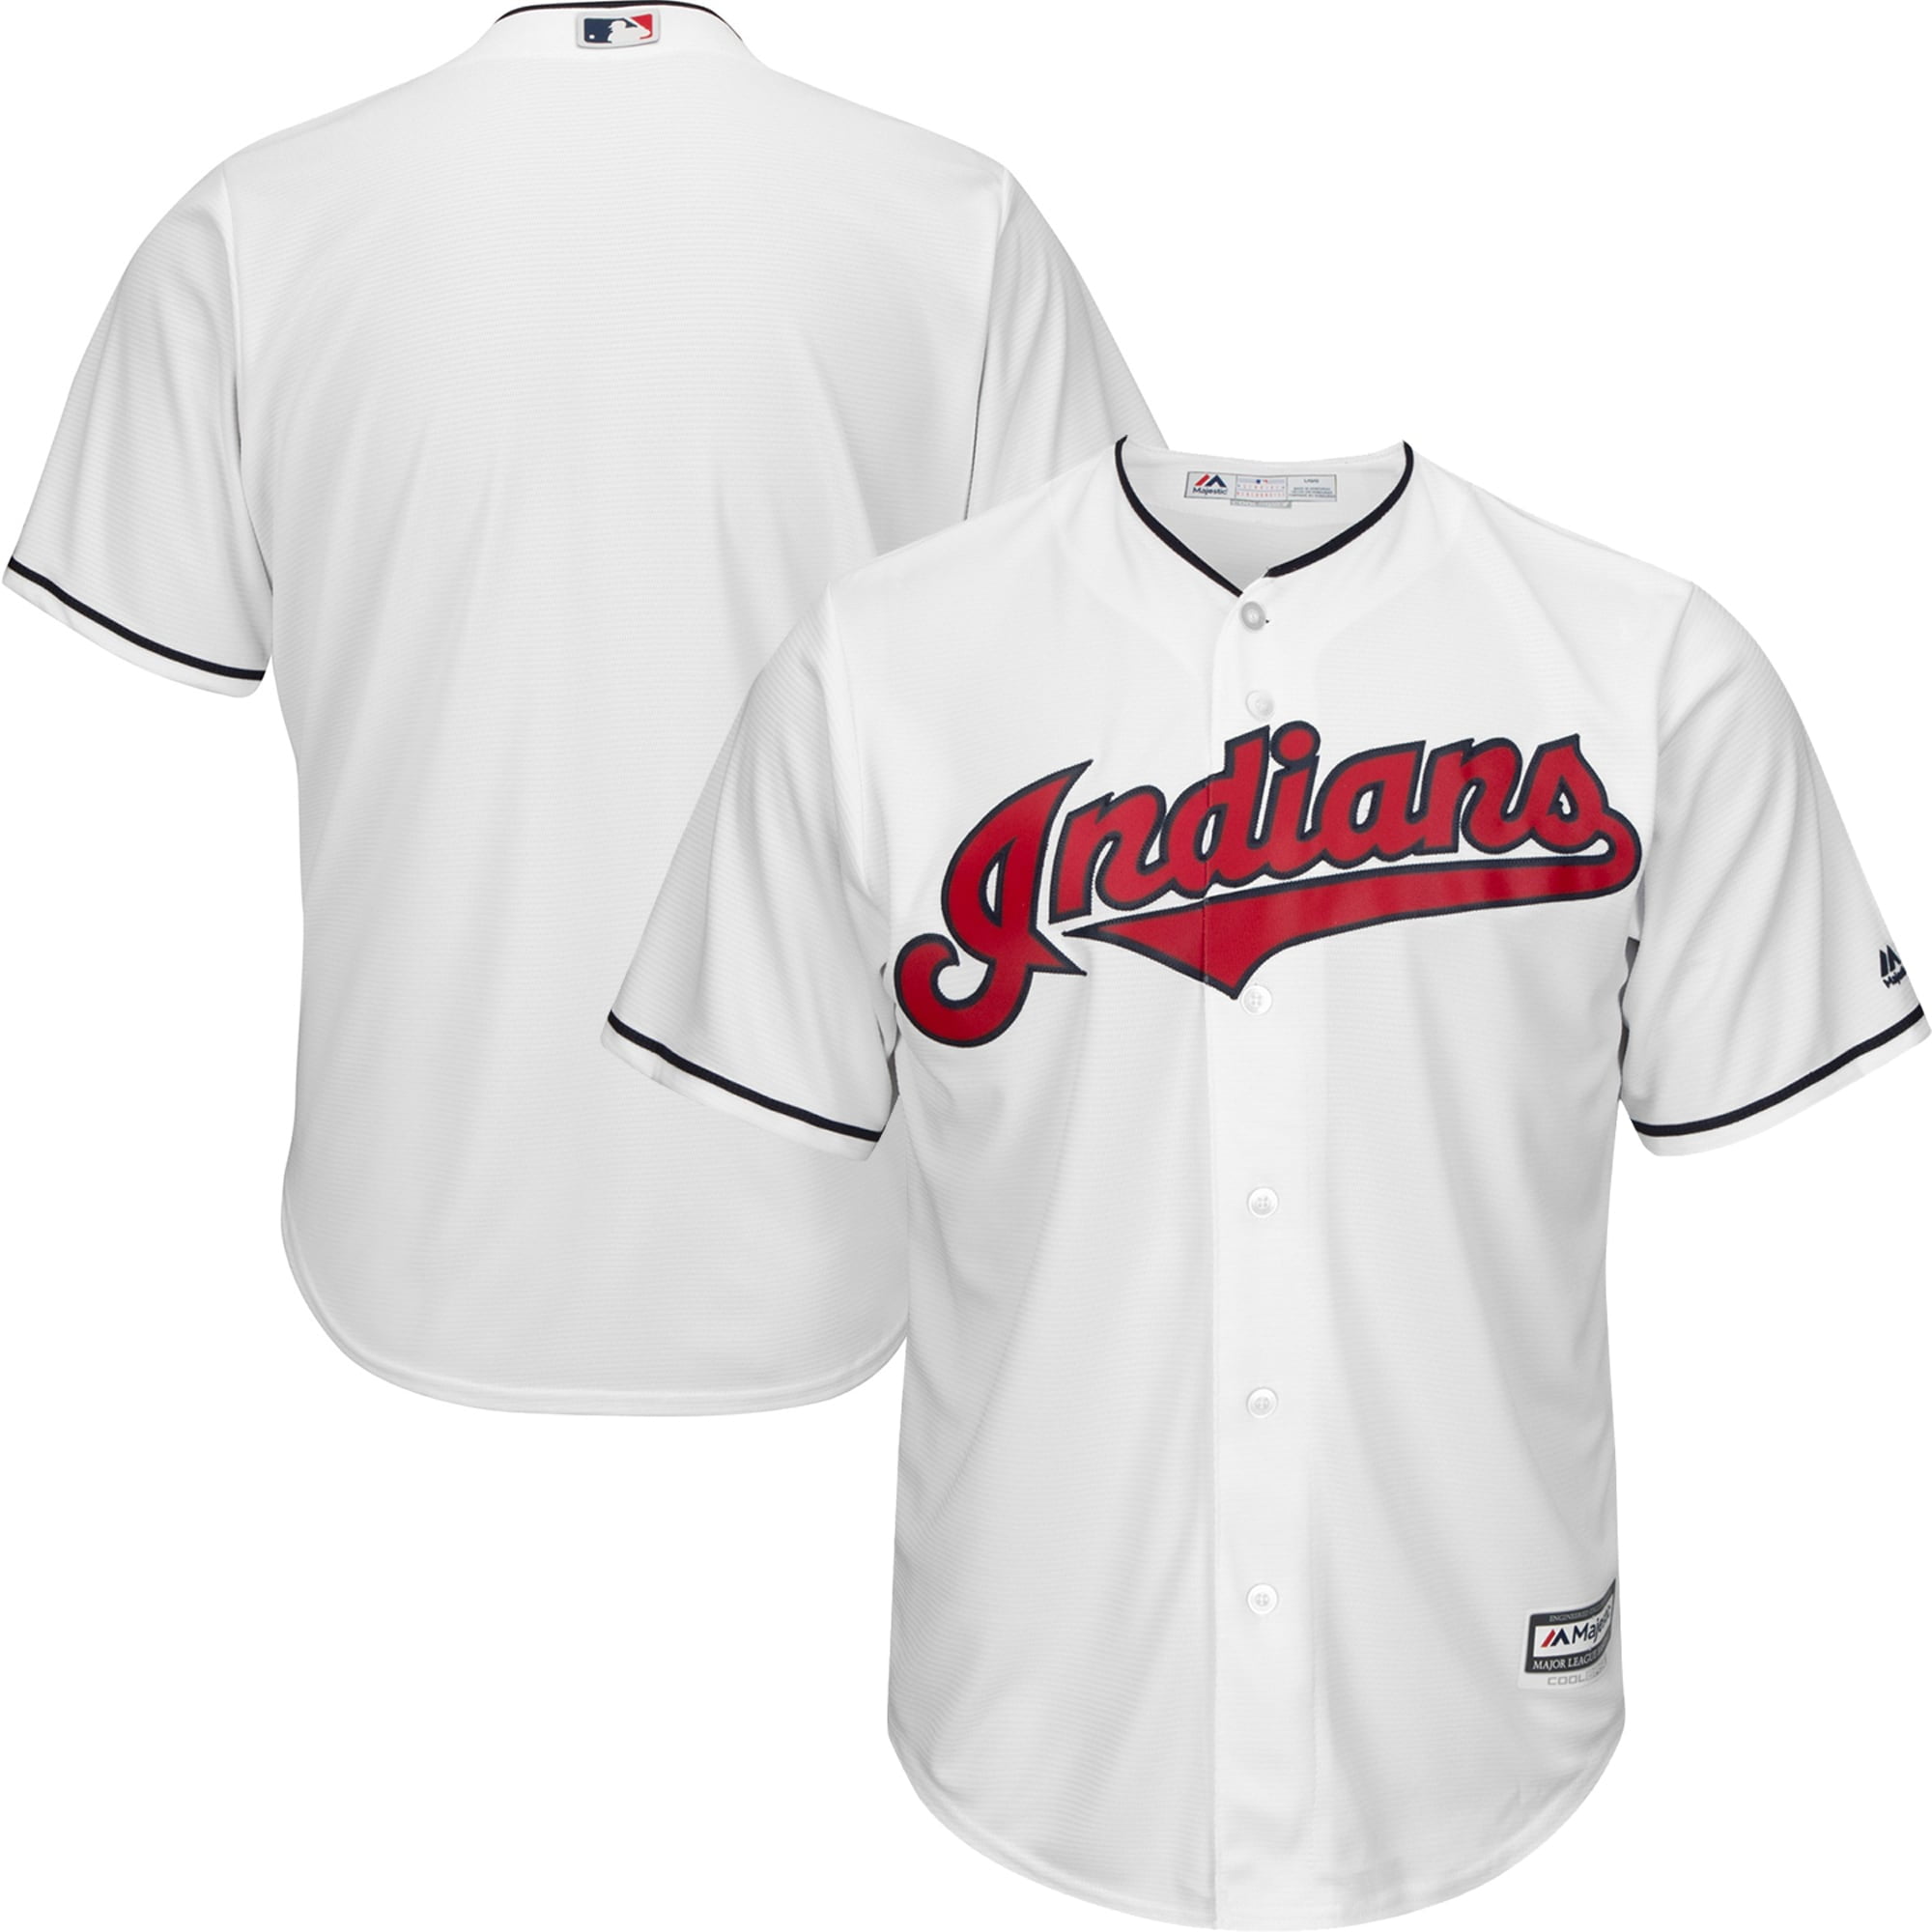 Cleveland Indians Majestic []Official<img src=